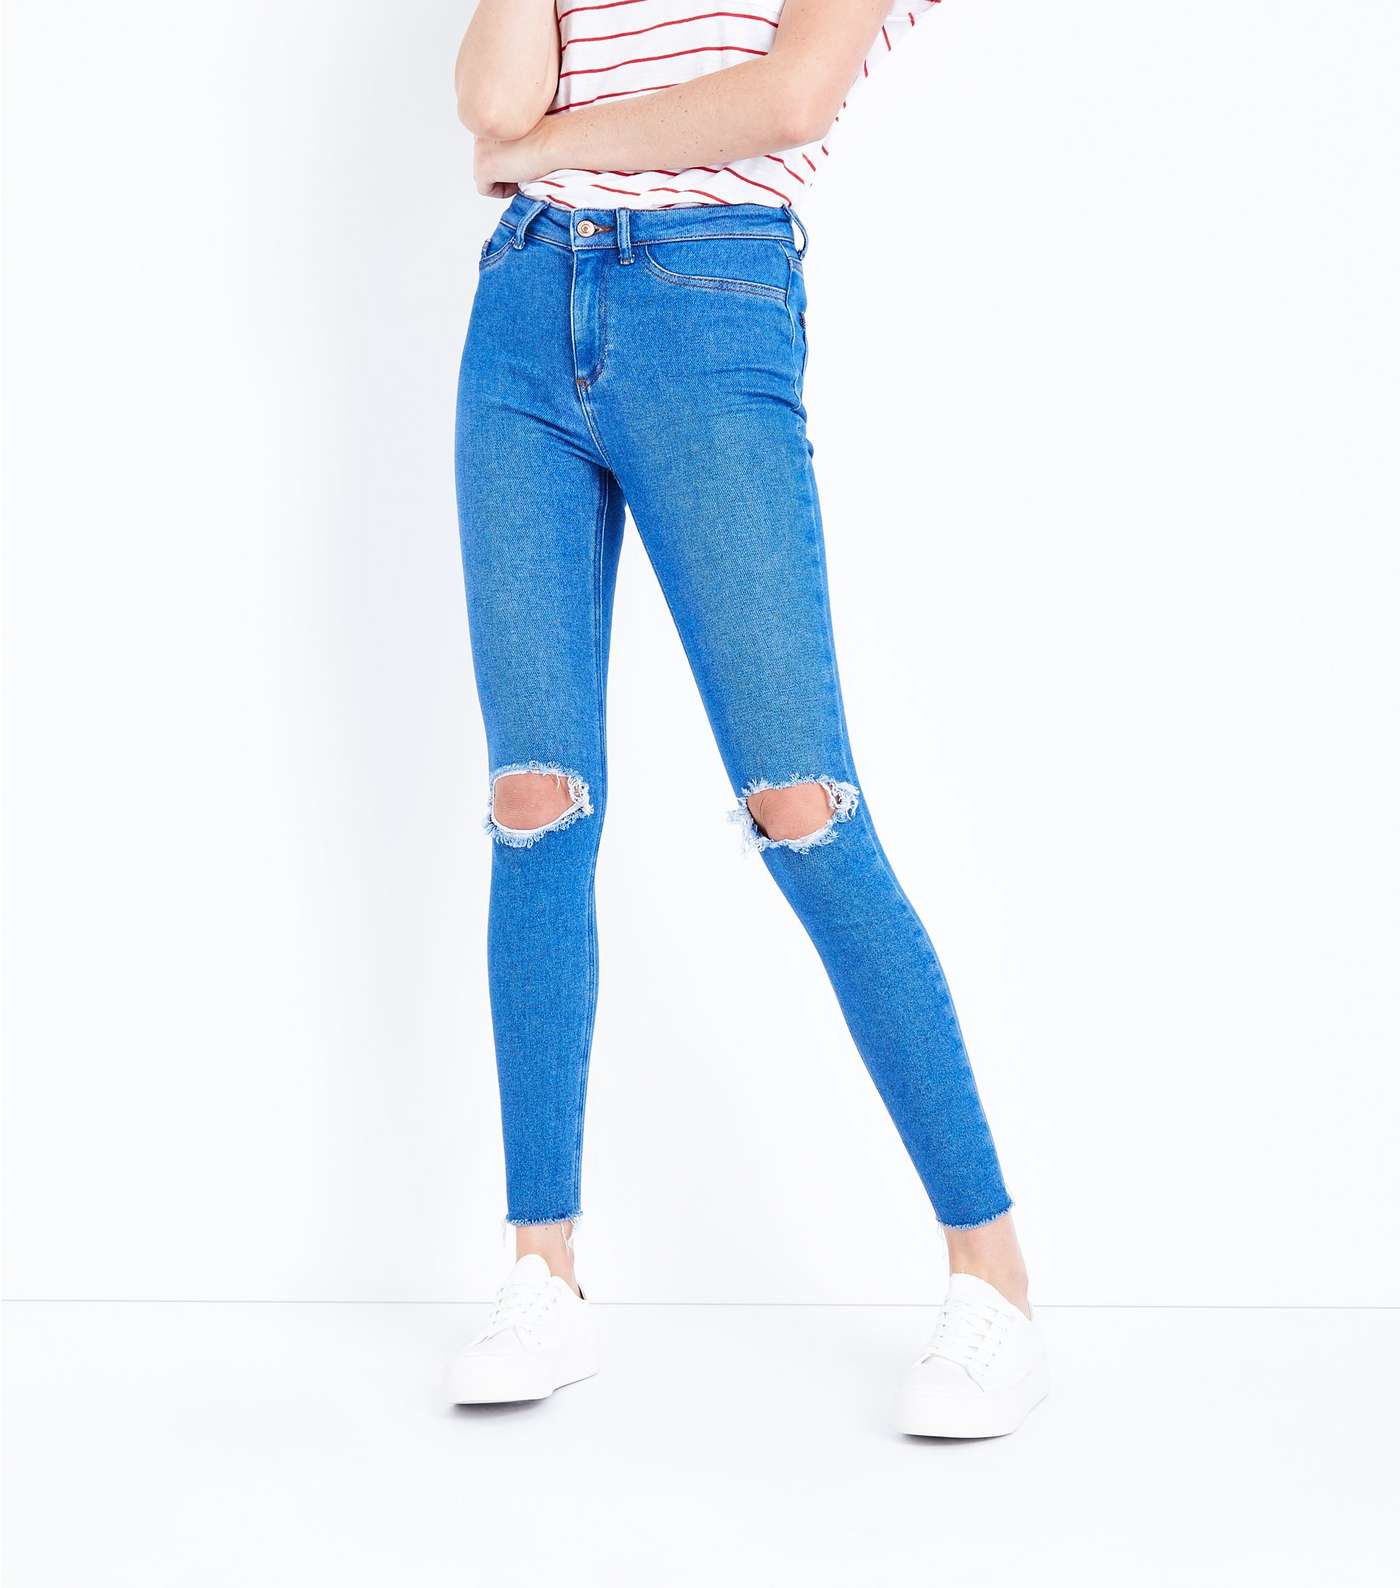 Bright Blue Ripped High Waist Super Skinny Hallie Jeans Image 2